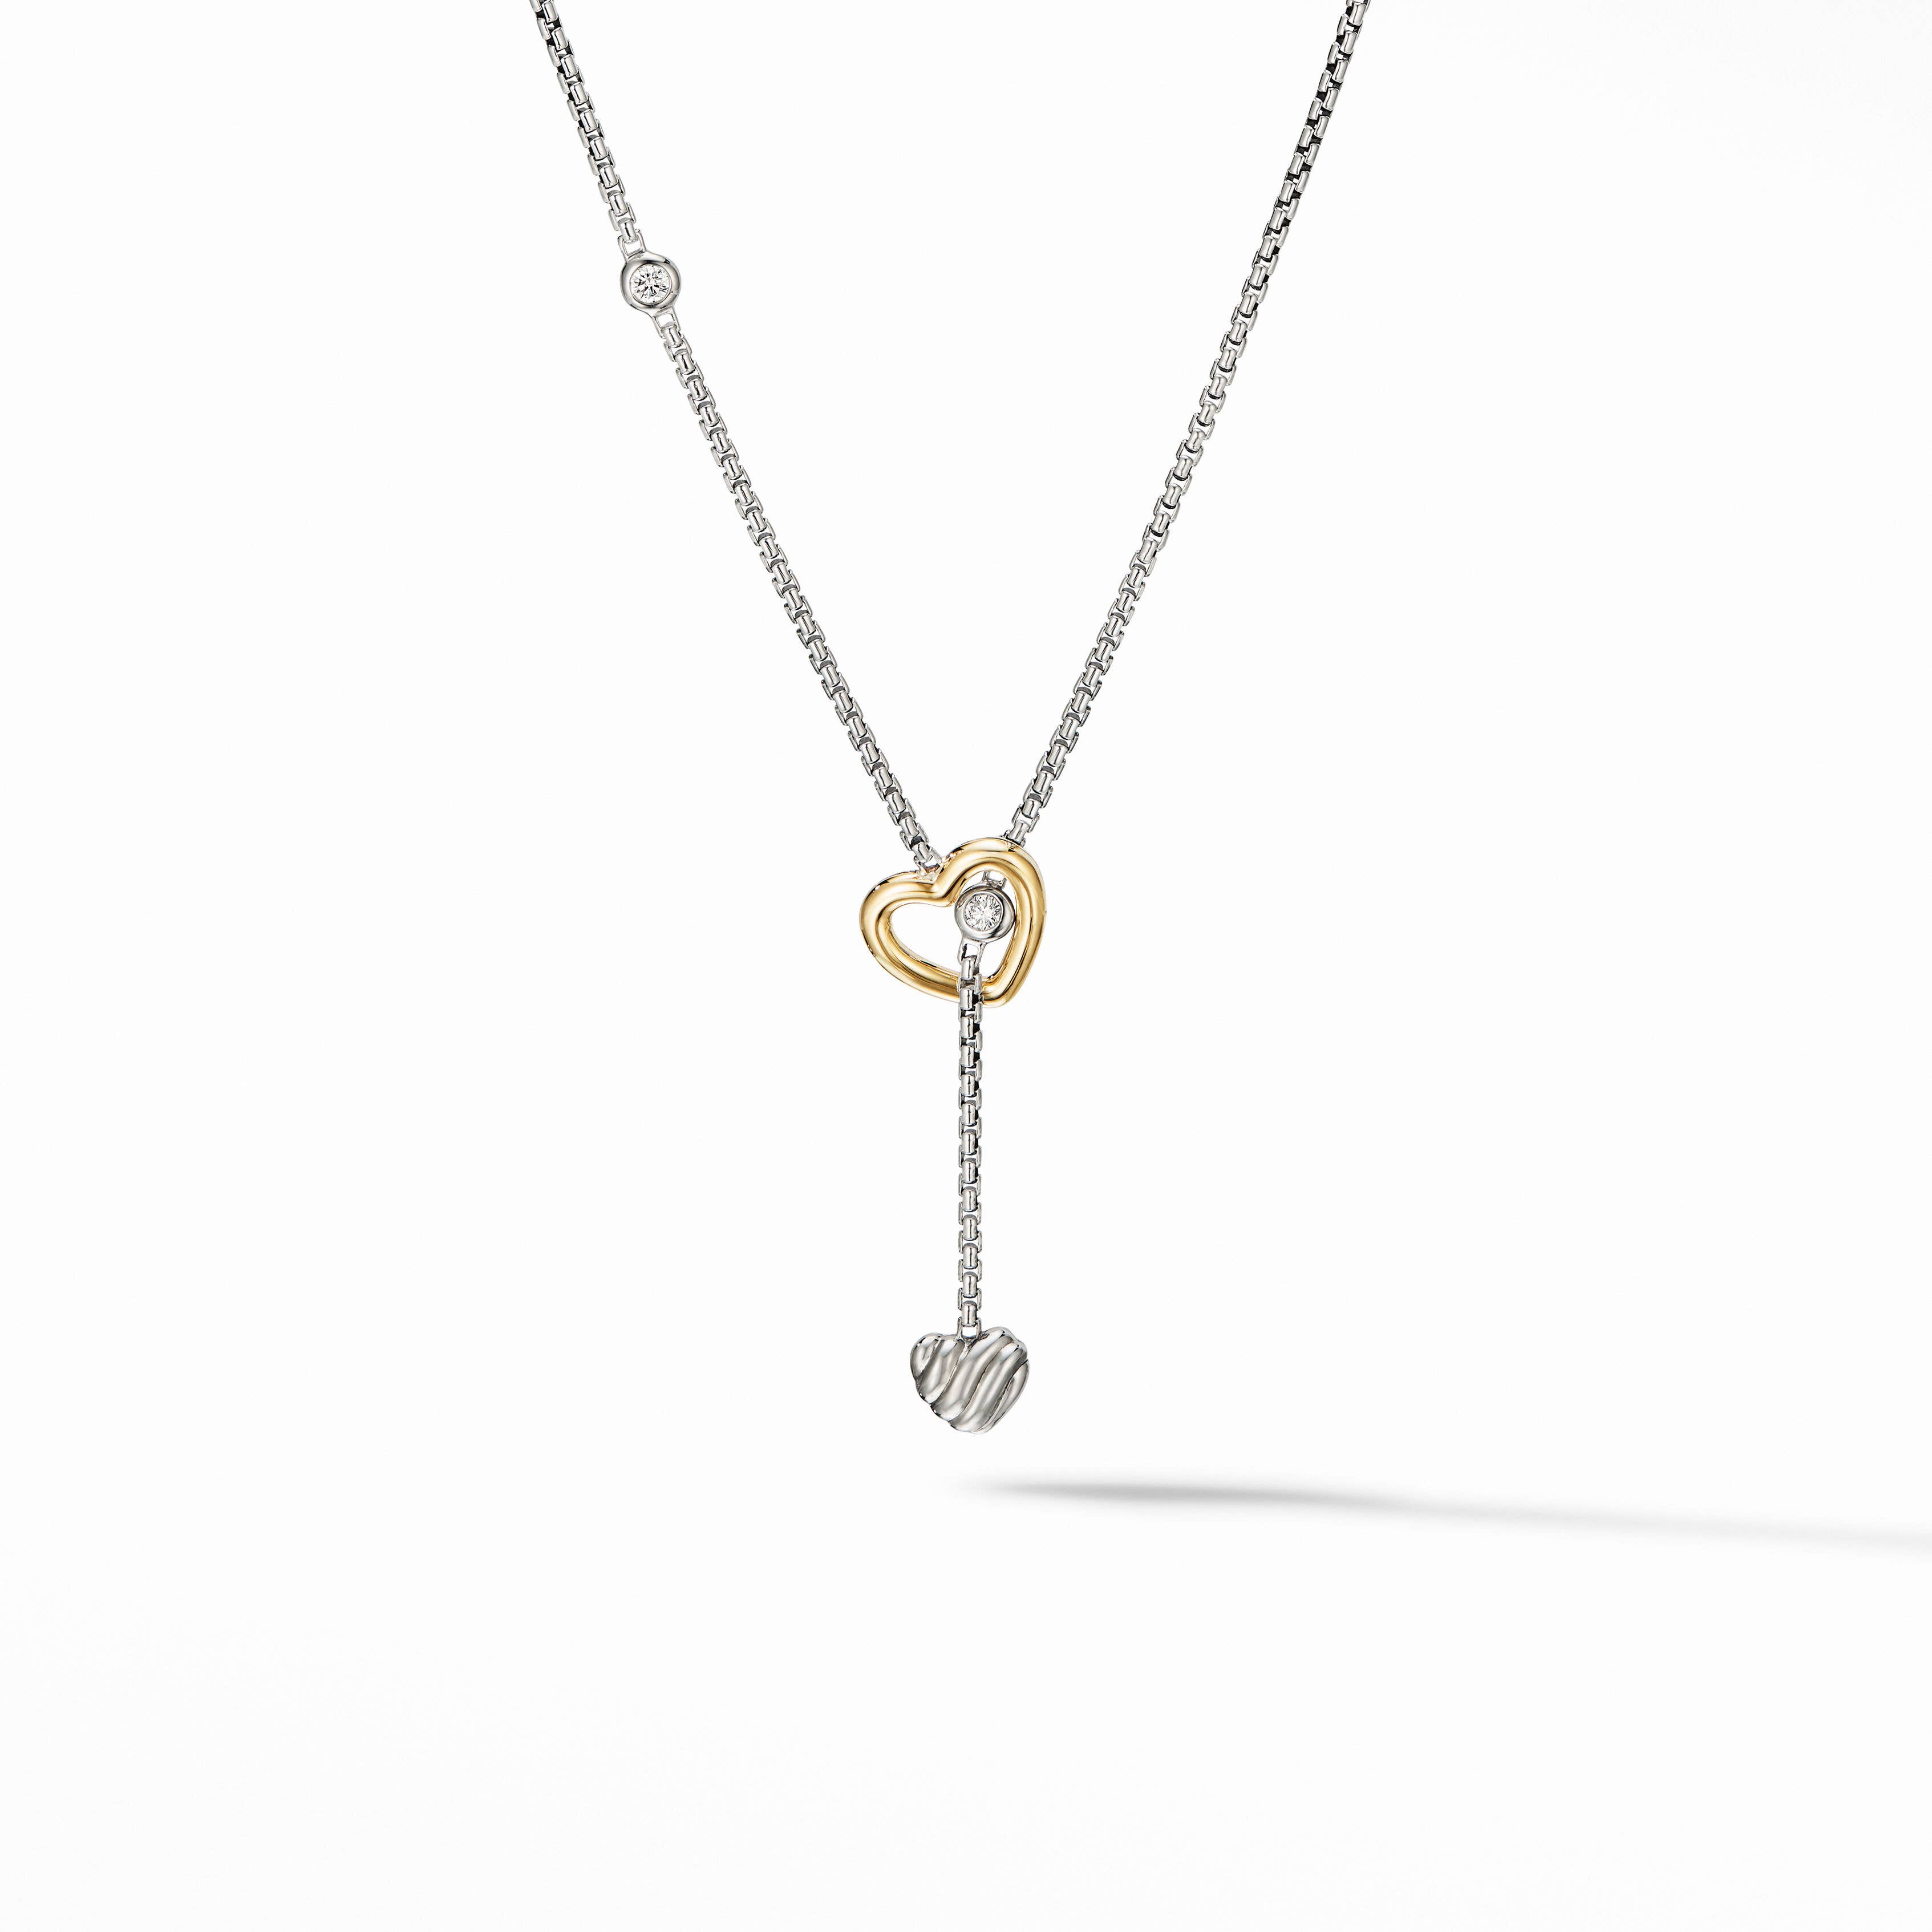 Cable Collectibles® Heart Y Necklace in Sterling Silver with 18K Yellow Gold and Pavé Diamonds